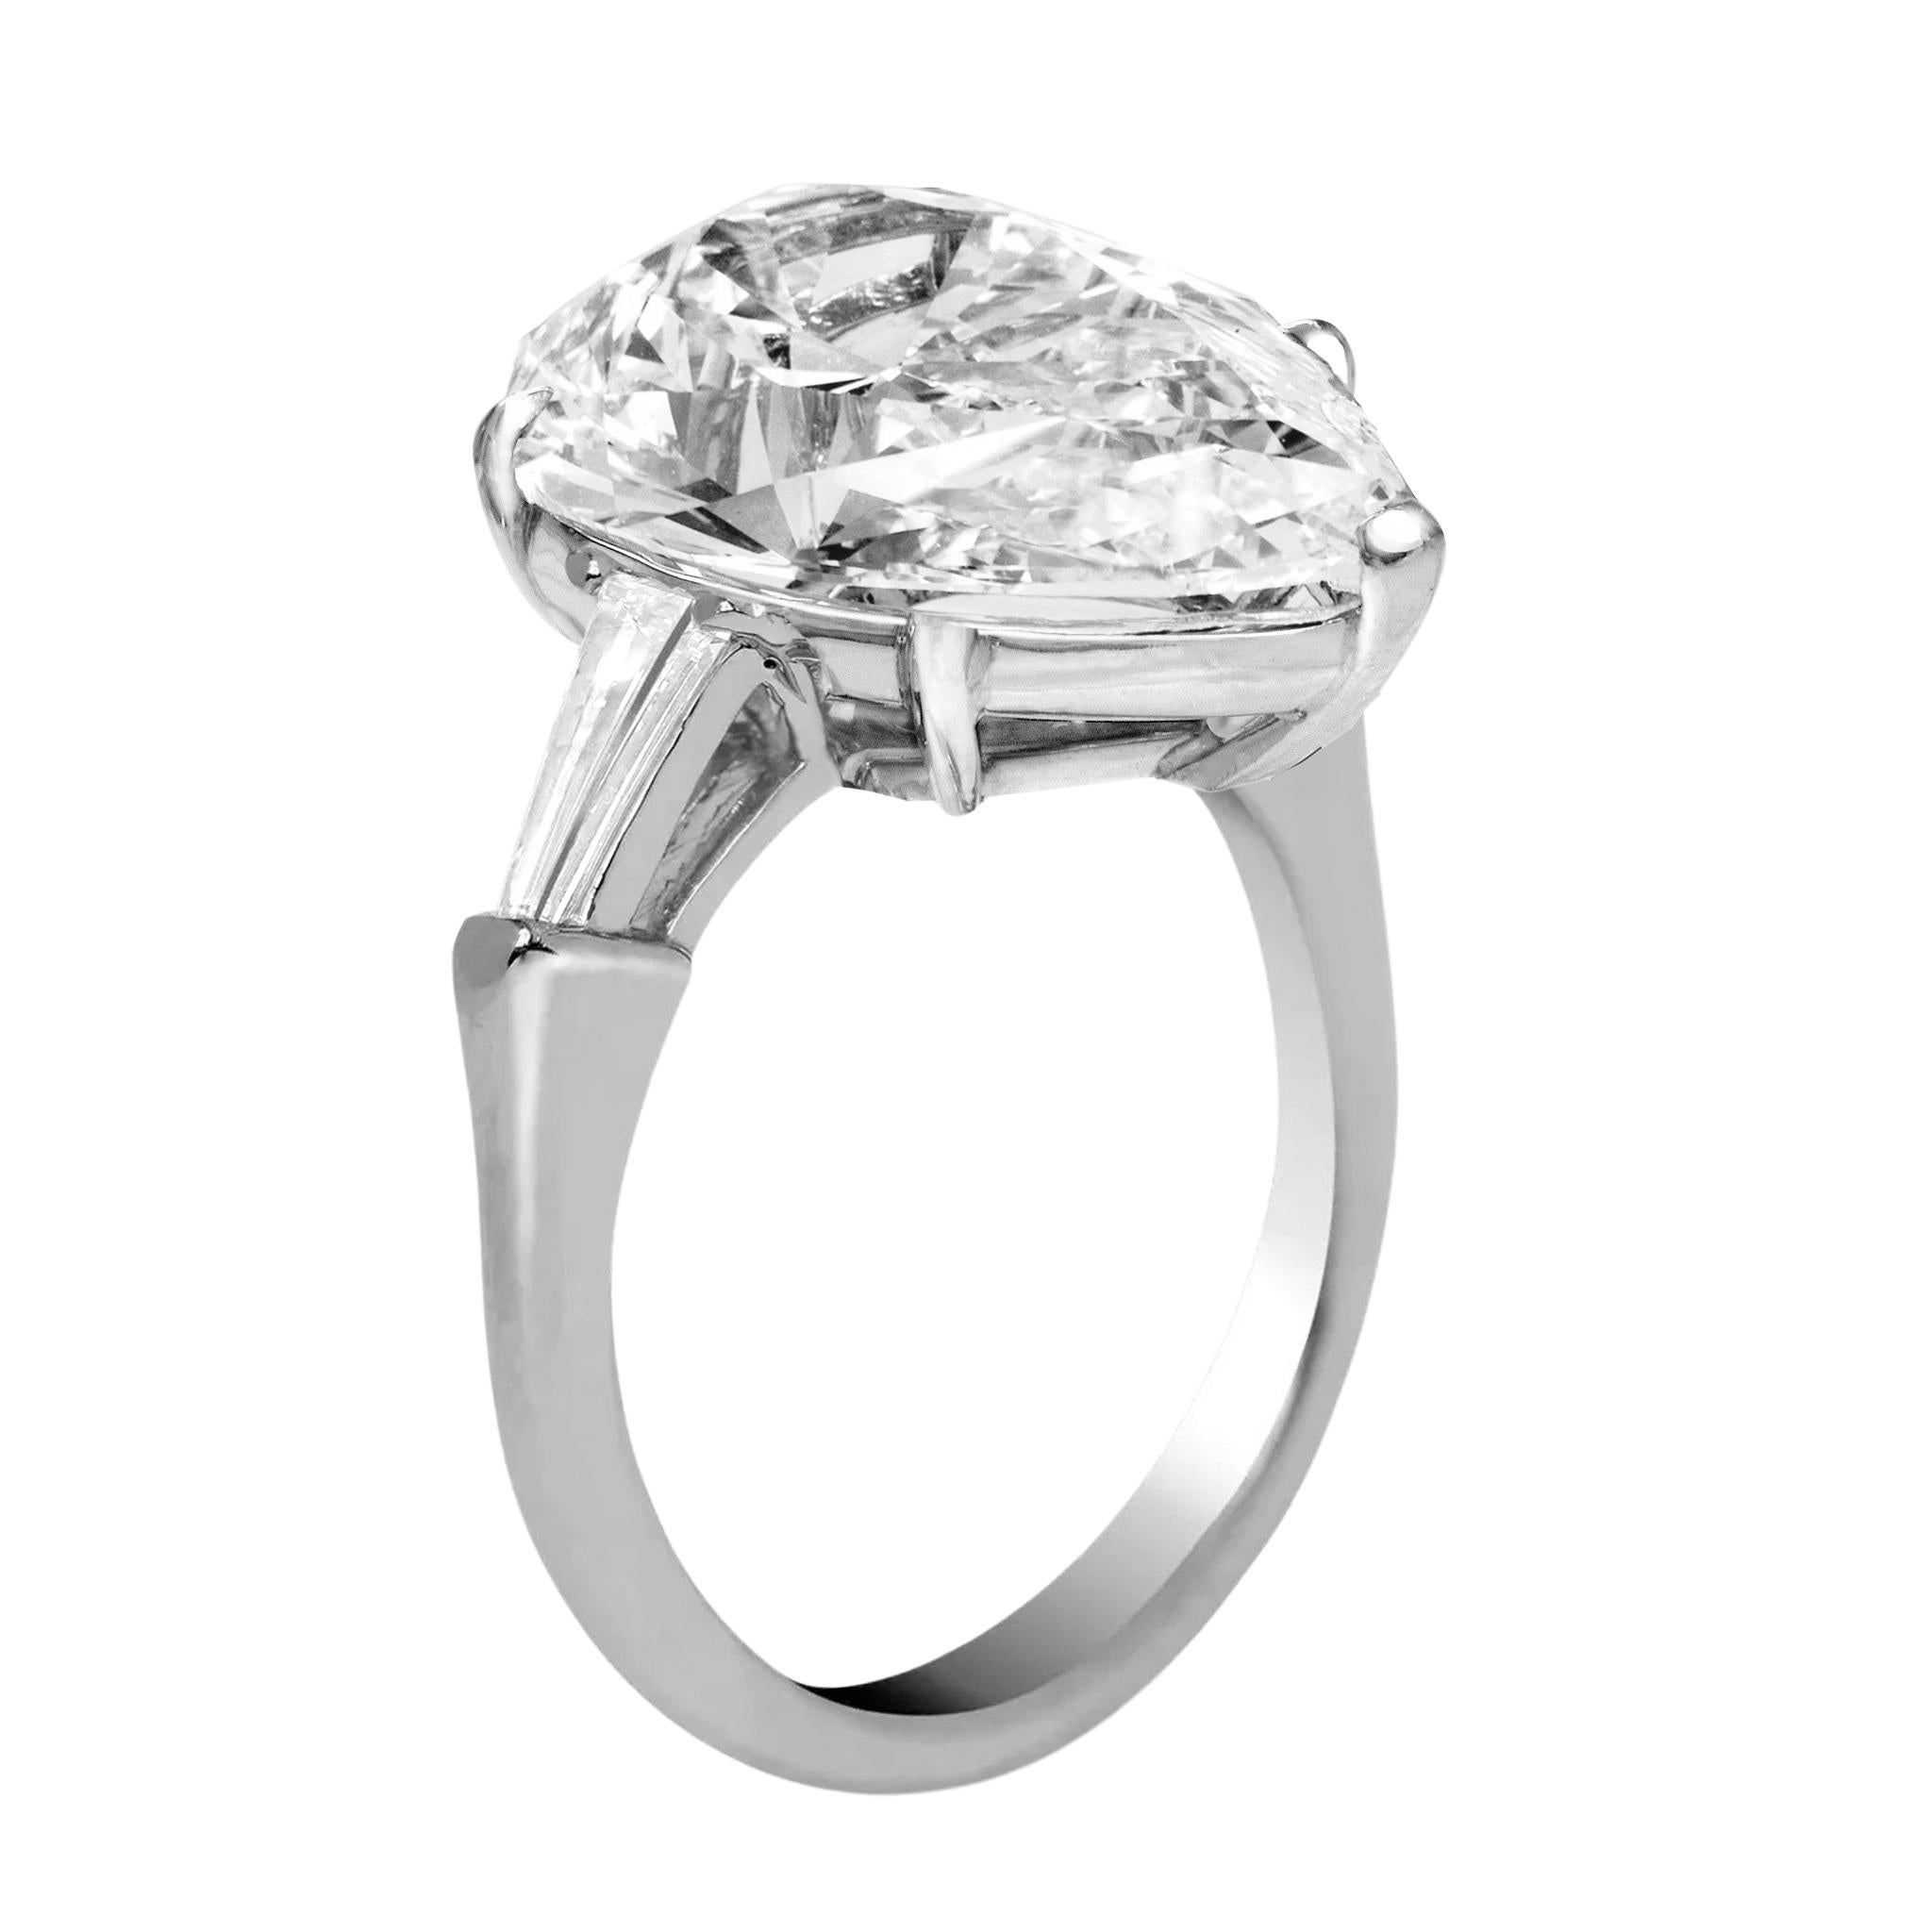 Round Cut GIA Certified 4.24 Carat Pear Cut Three Stone Diamond Ring For Sale